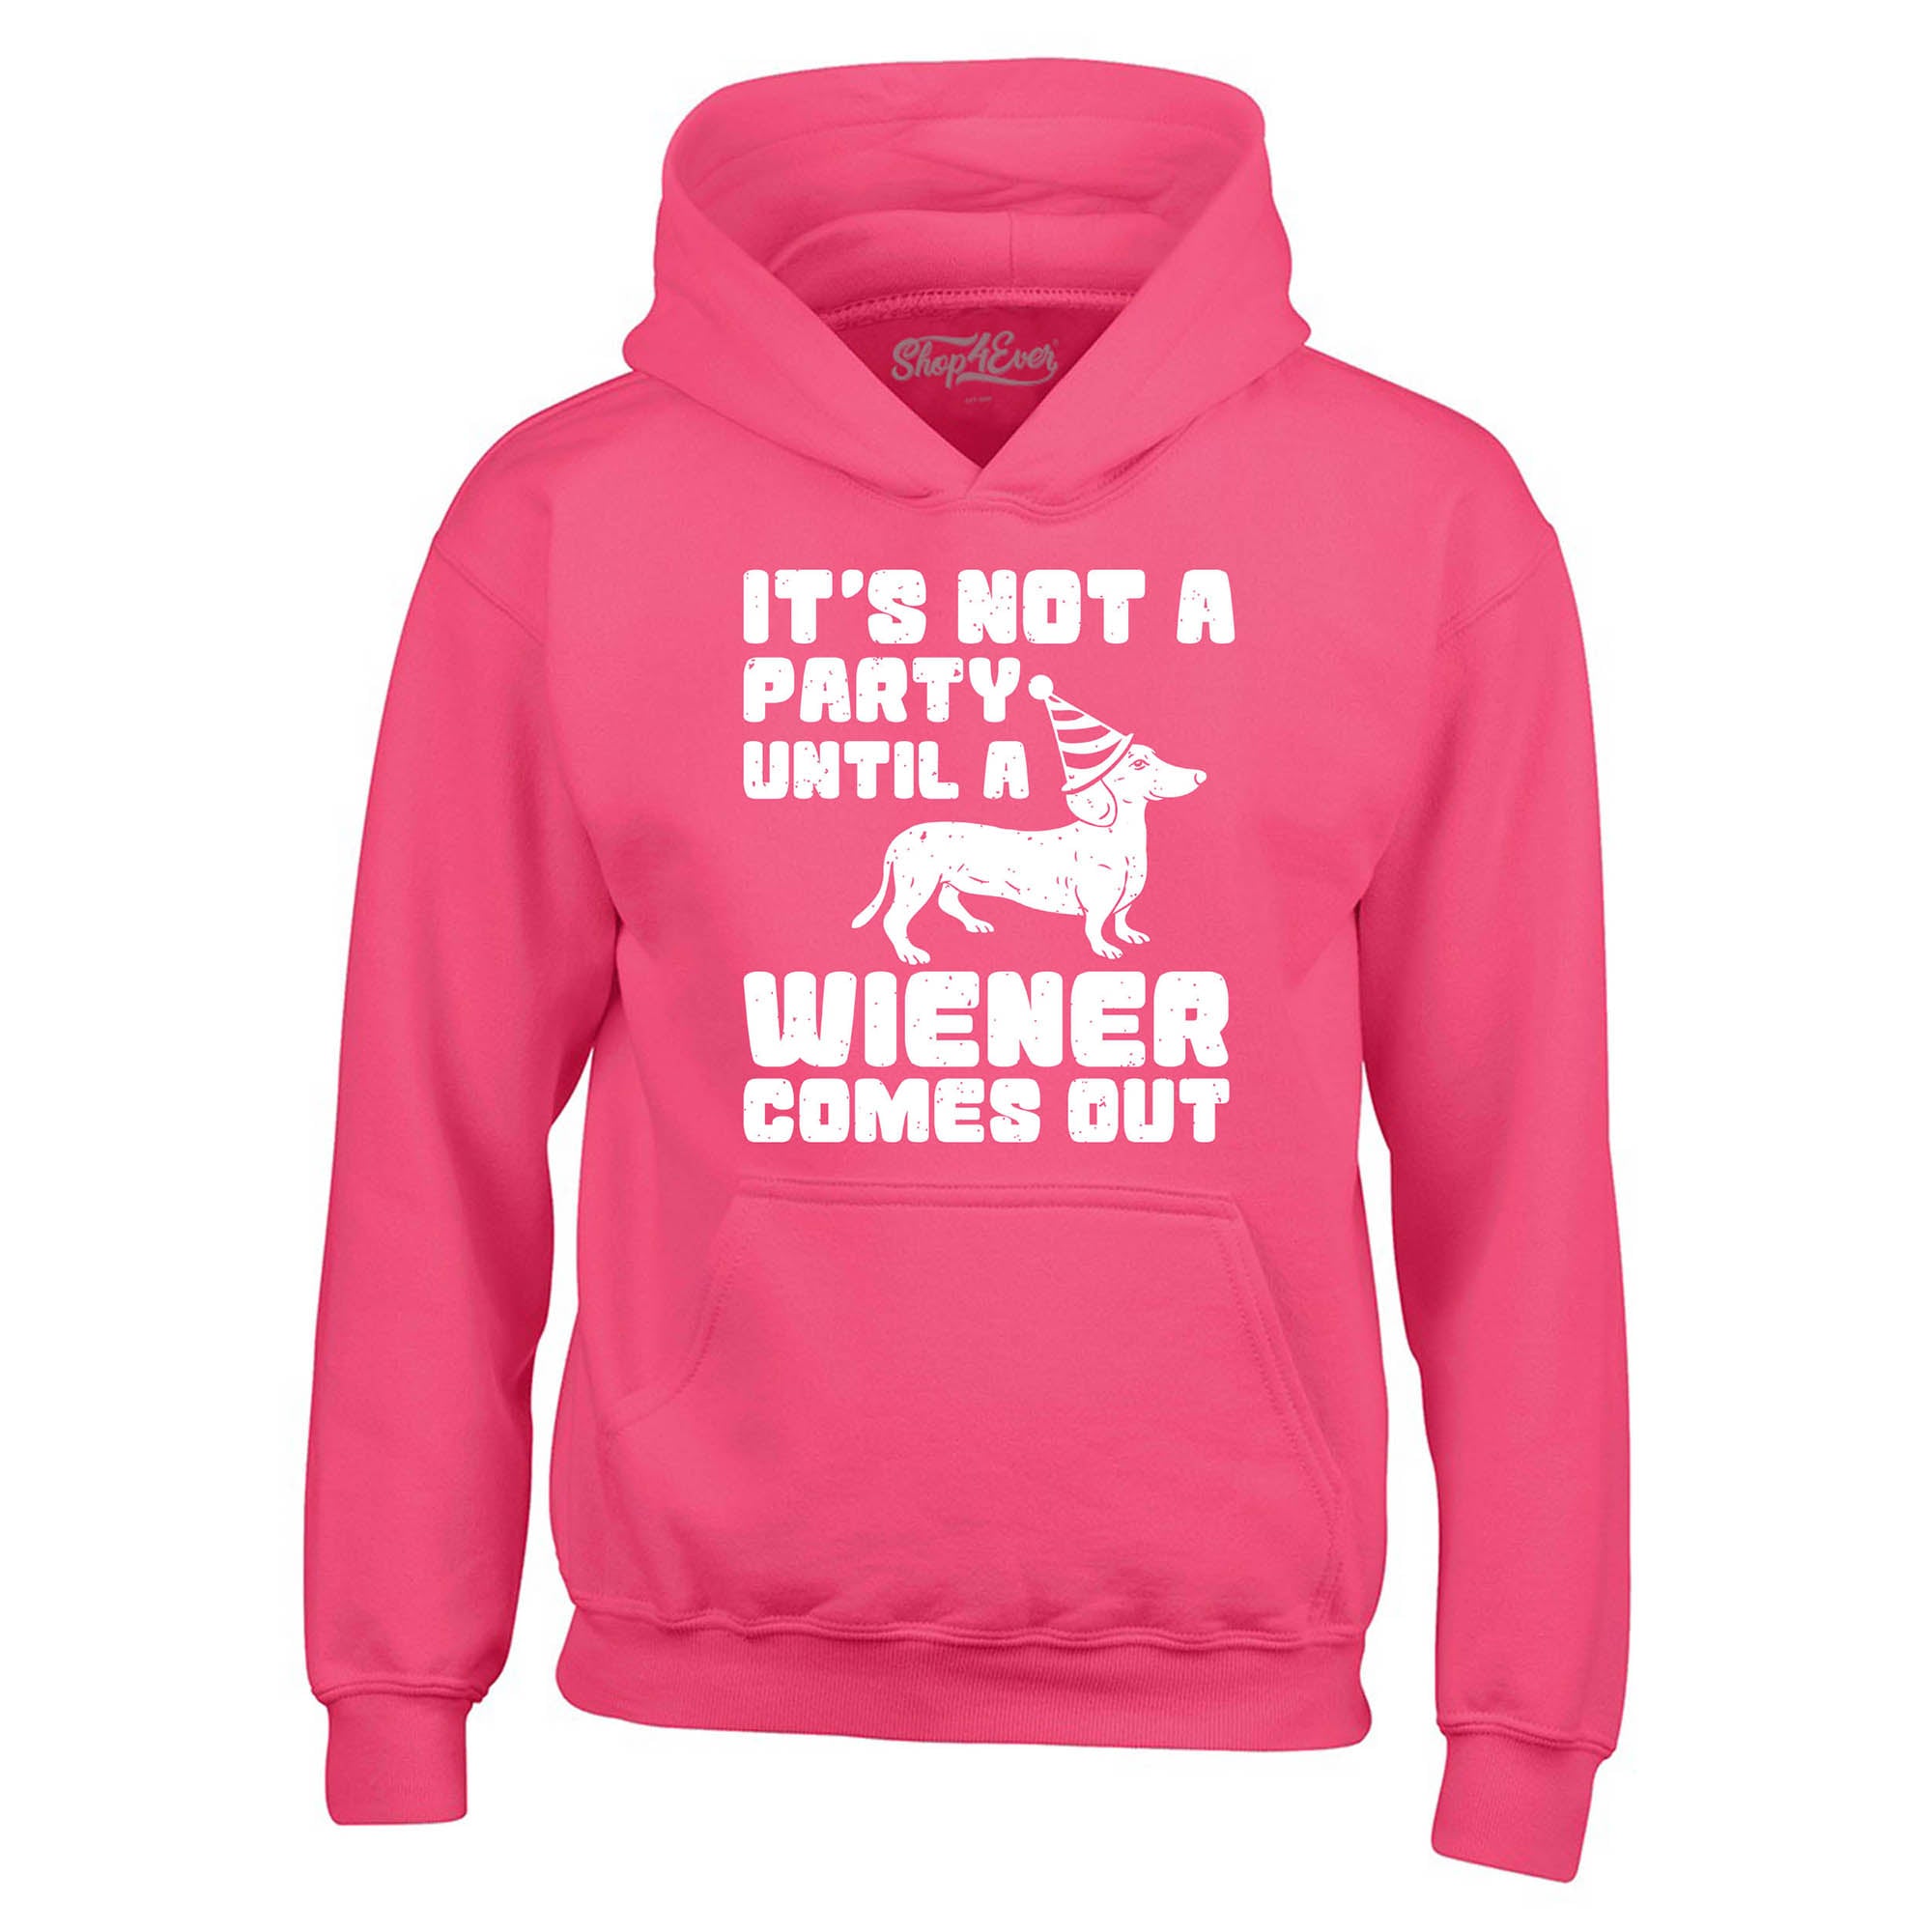 It's Not a Party Until the Wiener Comes Out Funny Dachshund Hoodie Sweatshirts